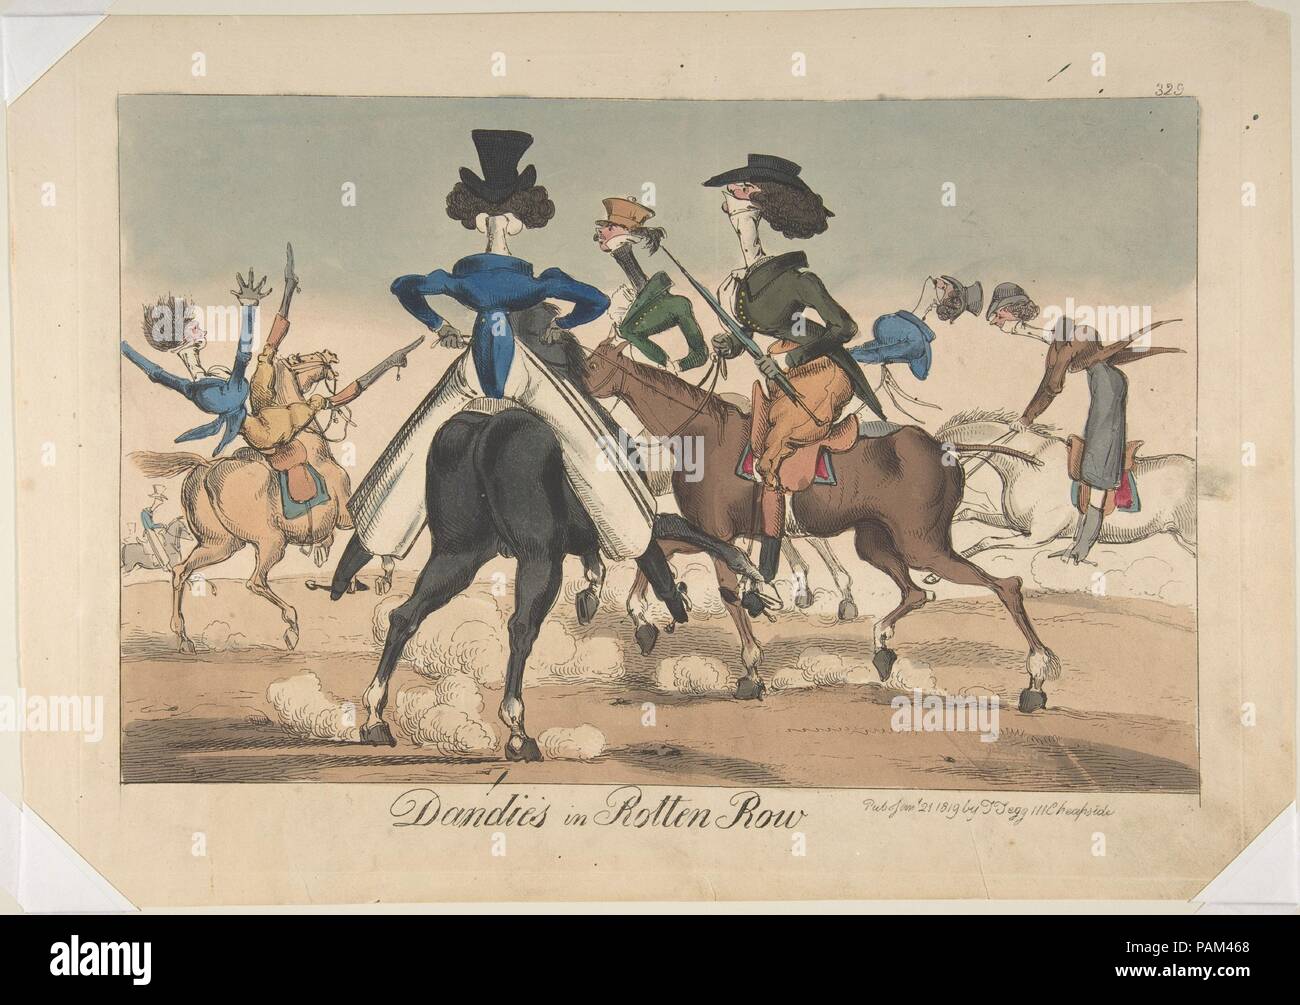 Dandies in Rotten Row. Artist: Attributed to William Heath ('Paul Pry') (British, London 1795-1840 Hampstead). Dimensions: plate: 9 13/16 x 13 3/4 in. (24.9 x 34.9 cm)  sheet: 10 9/16 x 15 1/16 in. (26.8 x 38.2 cm). Publisher: Thomas Tegg (British, 1776-1846). Date: January 21, 1819.  Rotten Row was the nickname for a road established along the southern edge of Hyde Park where fashionable Londoners paraded their carriages or rode on horseback. Men in particular used the site to display riding skills and show off the latest fashions. These dandies wear either spurred boots with riding britches, Stock Photo